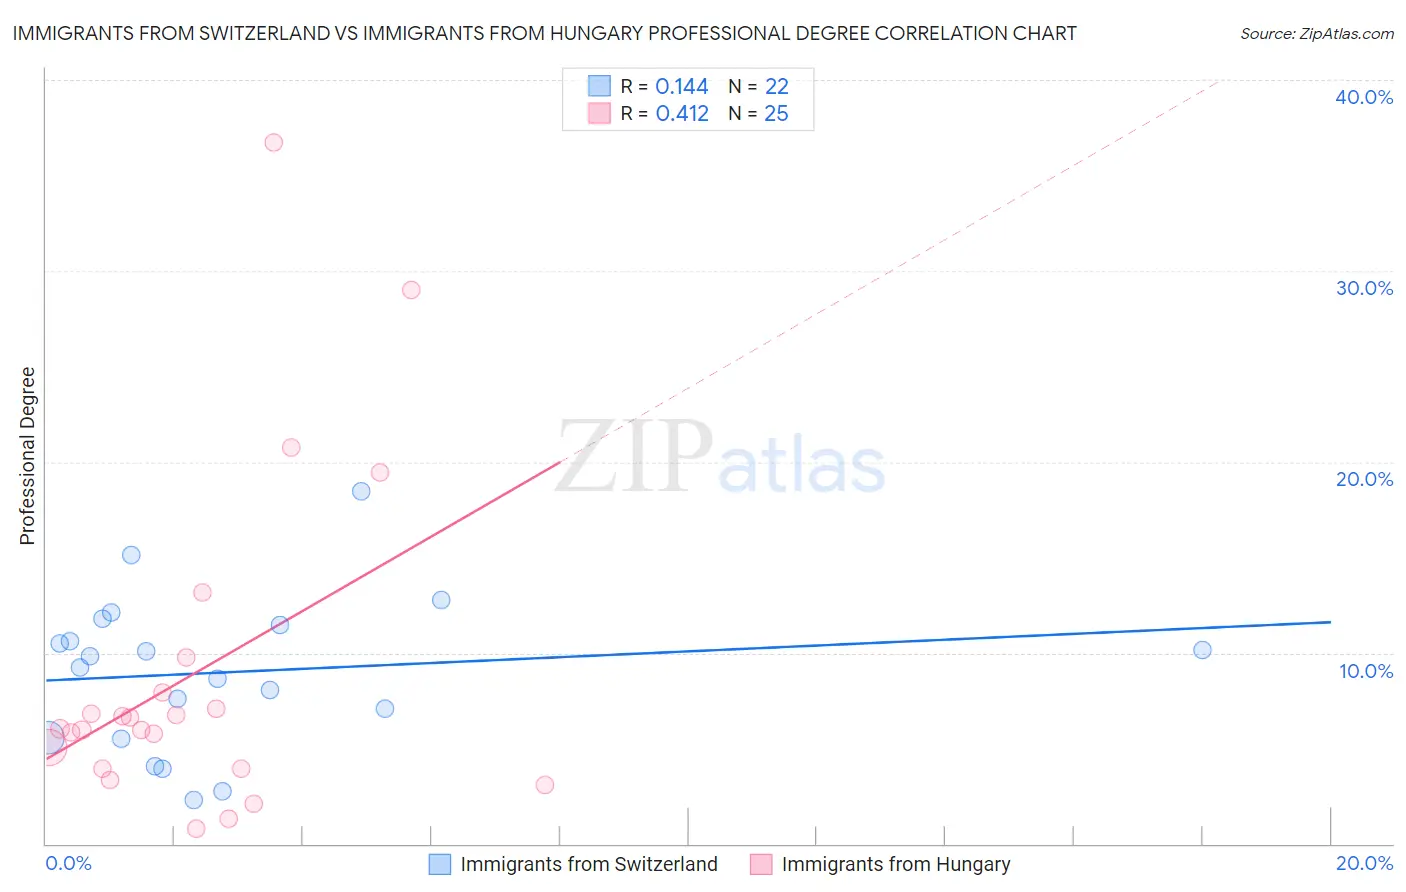 Immigrants from Switzerland vs Immigrants from Hungary Professional Degree